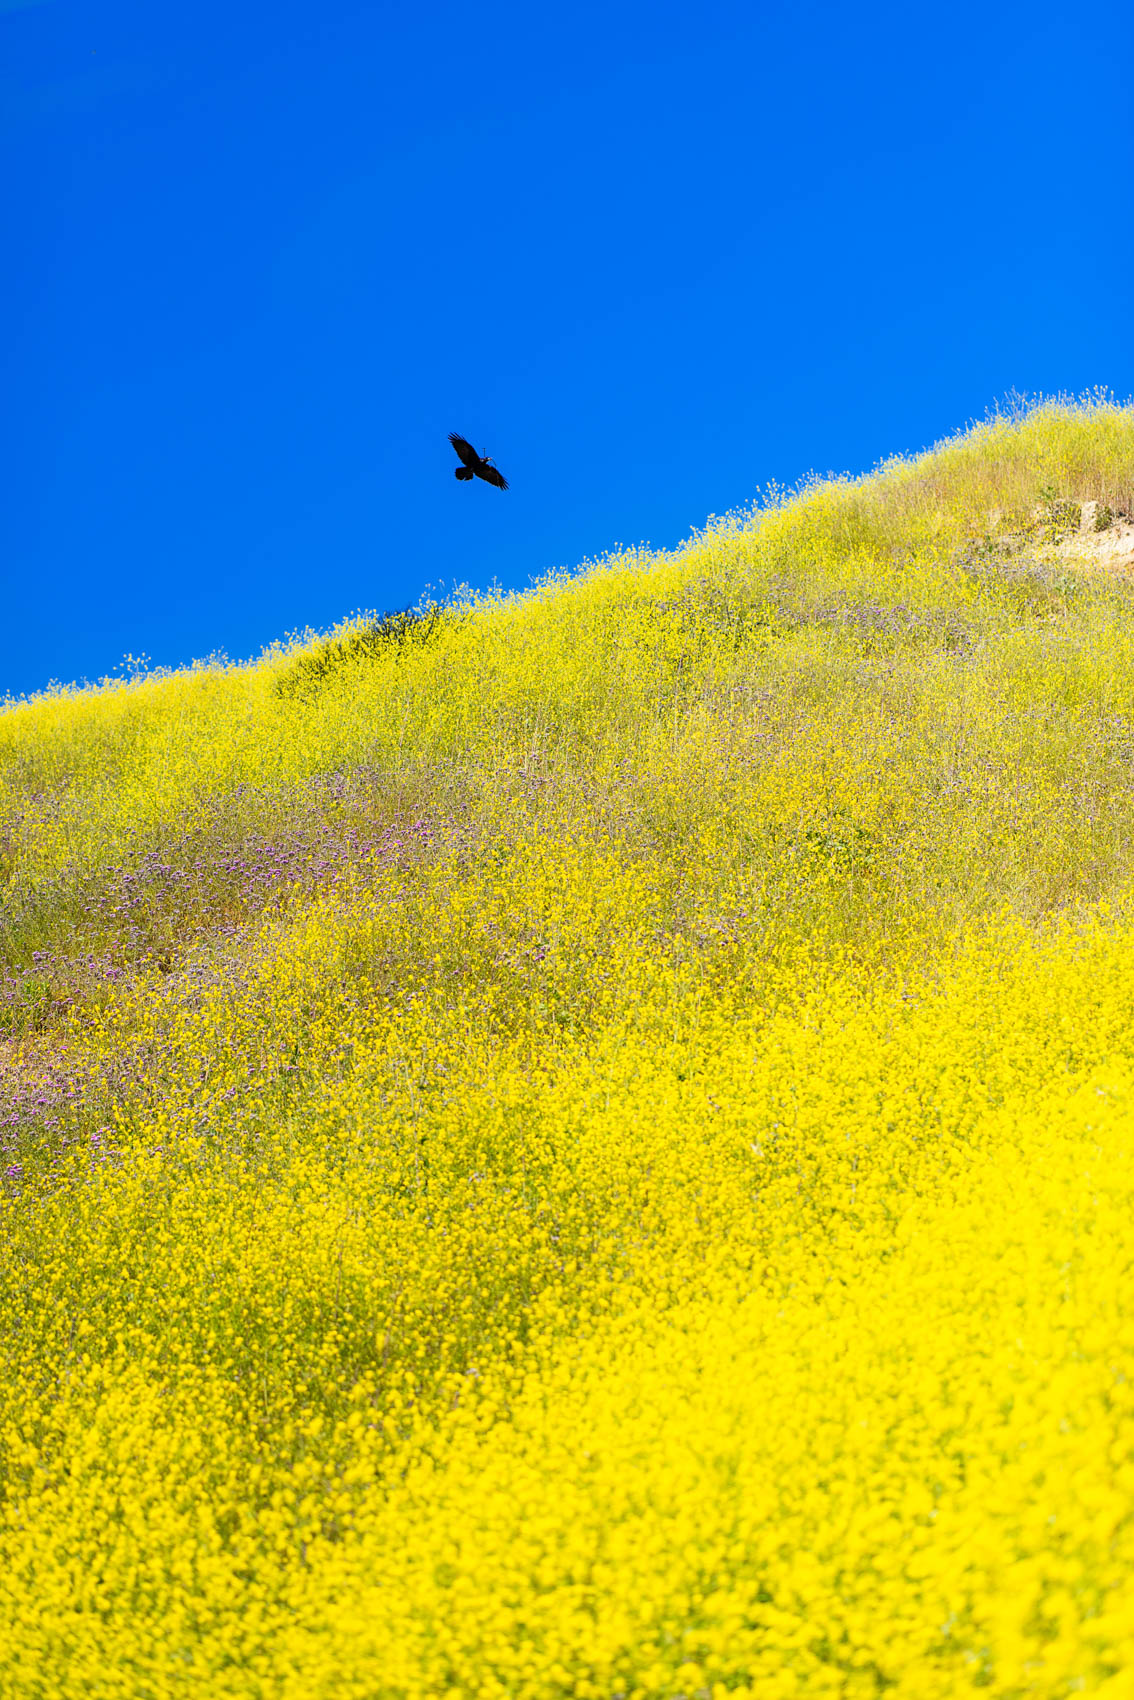 A bird flies over a field of yellow wildflowers during a superbloom in Malibu, Calif.